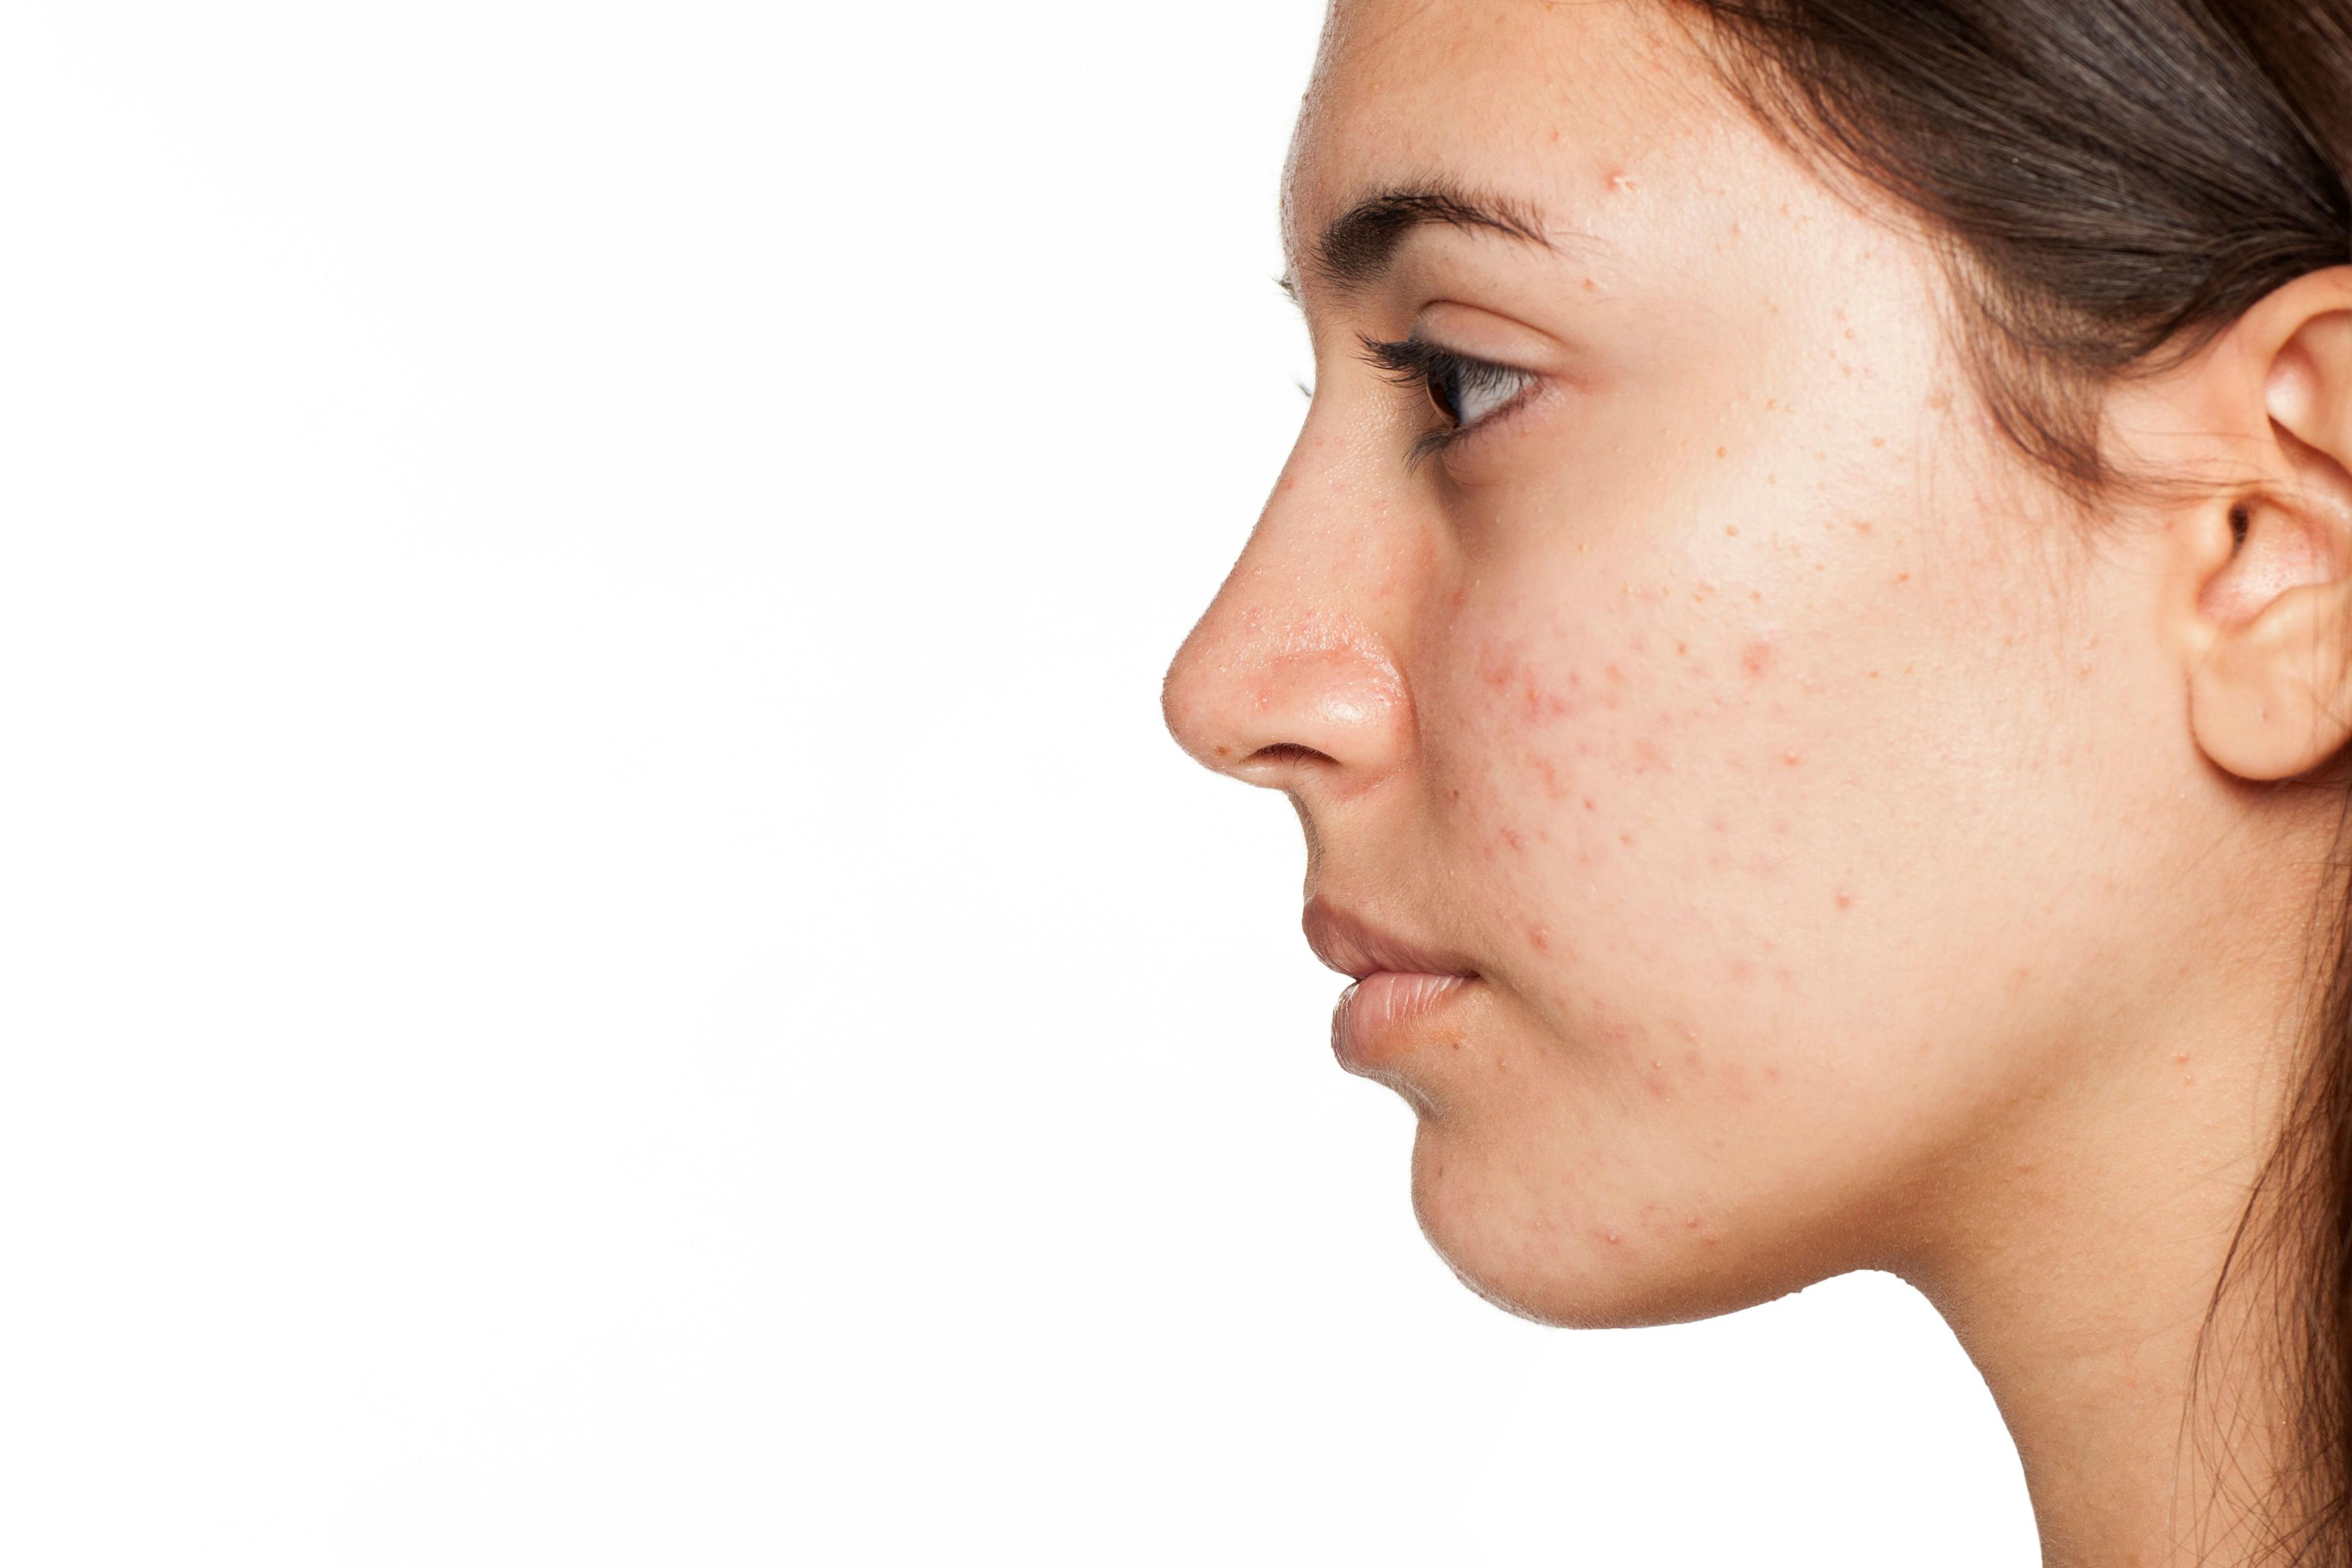 Acne Flares May be Worsened by Climate Change